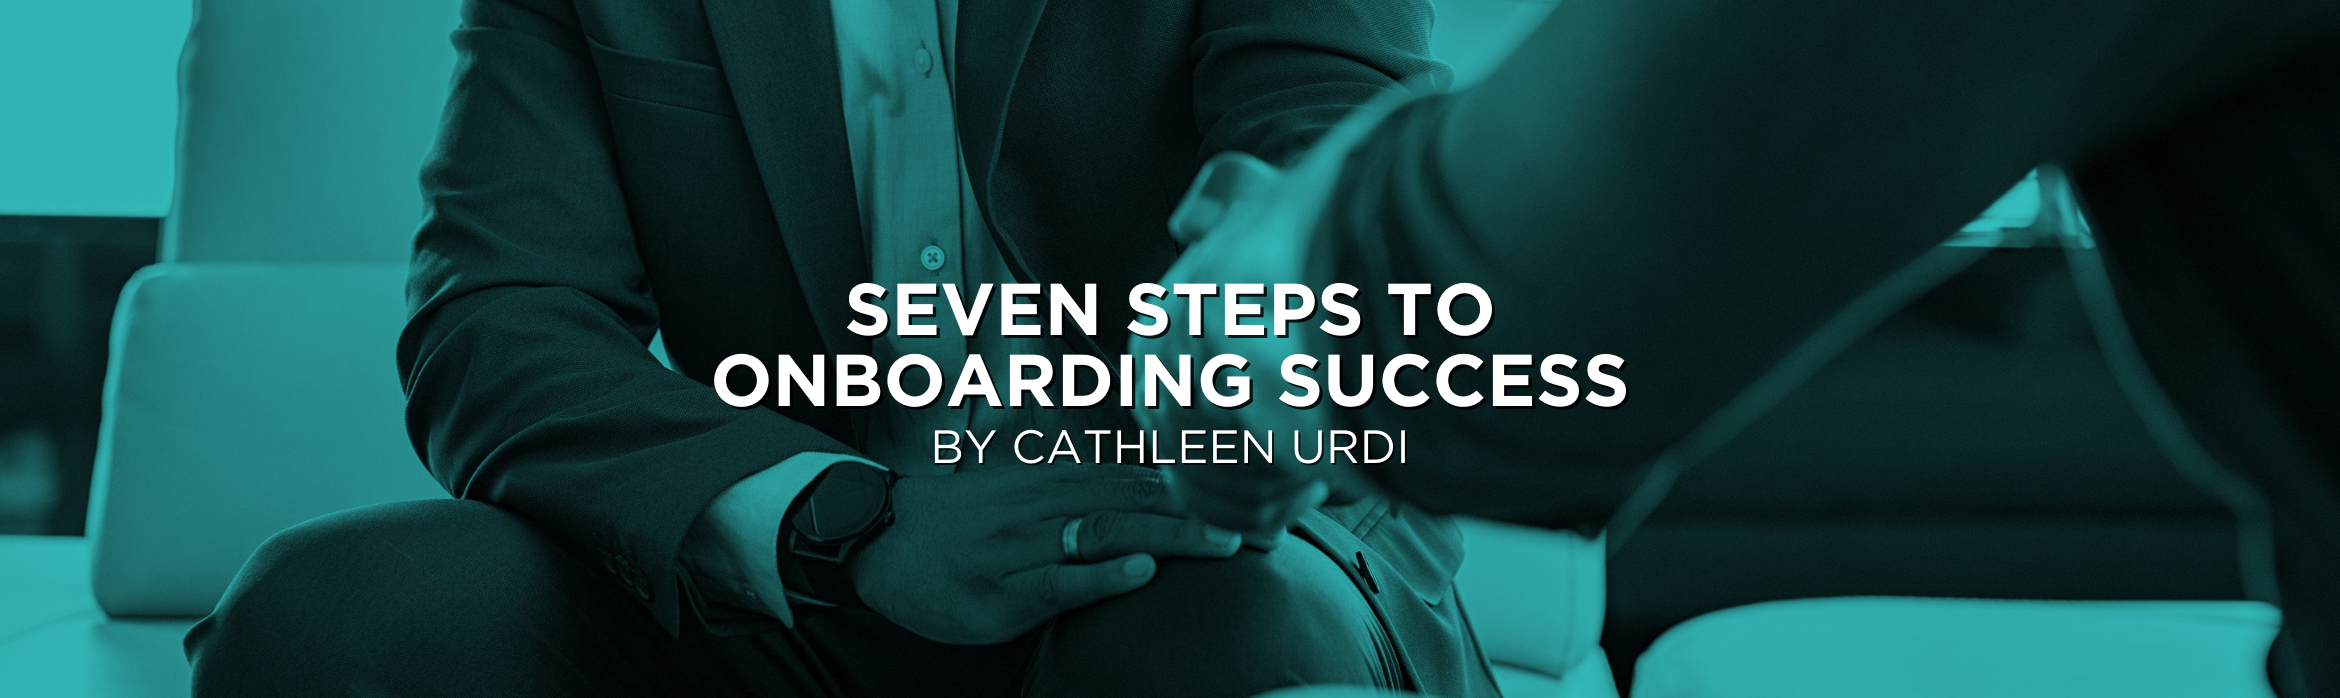 Seven Steps to Onboarding Success